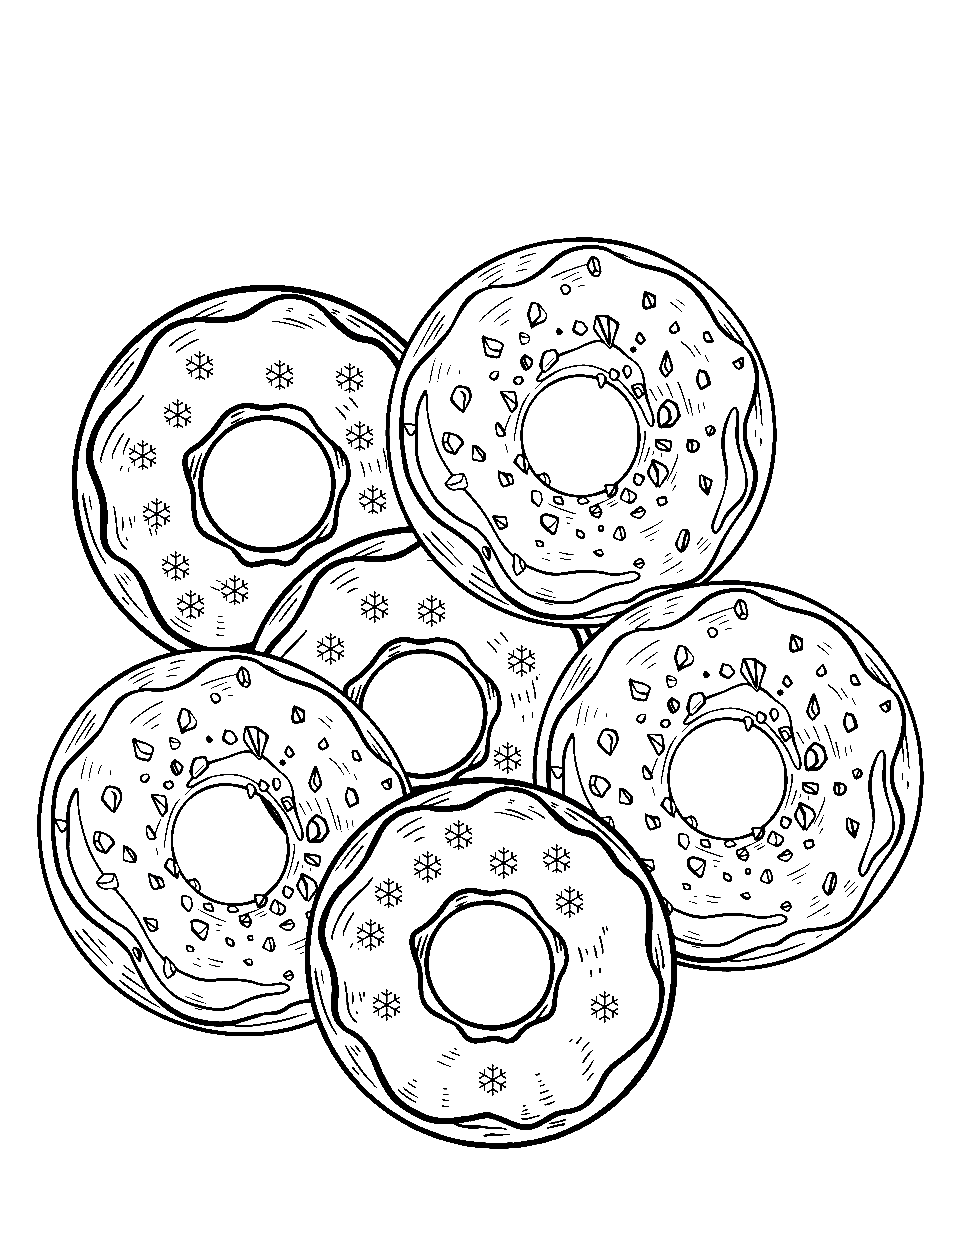 Winter Wonderland Donuts Donut Coloring Page - Sugar-coated donuts with winter-themed icing and sprinkles, like snowflakes and icicles.